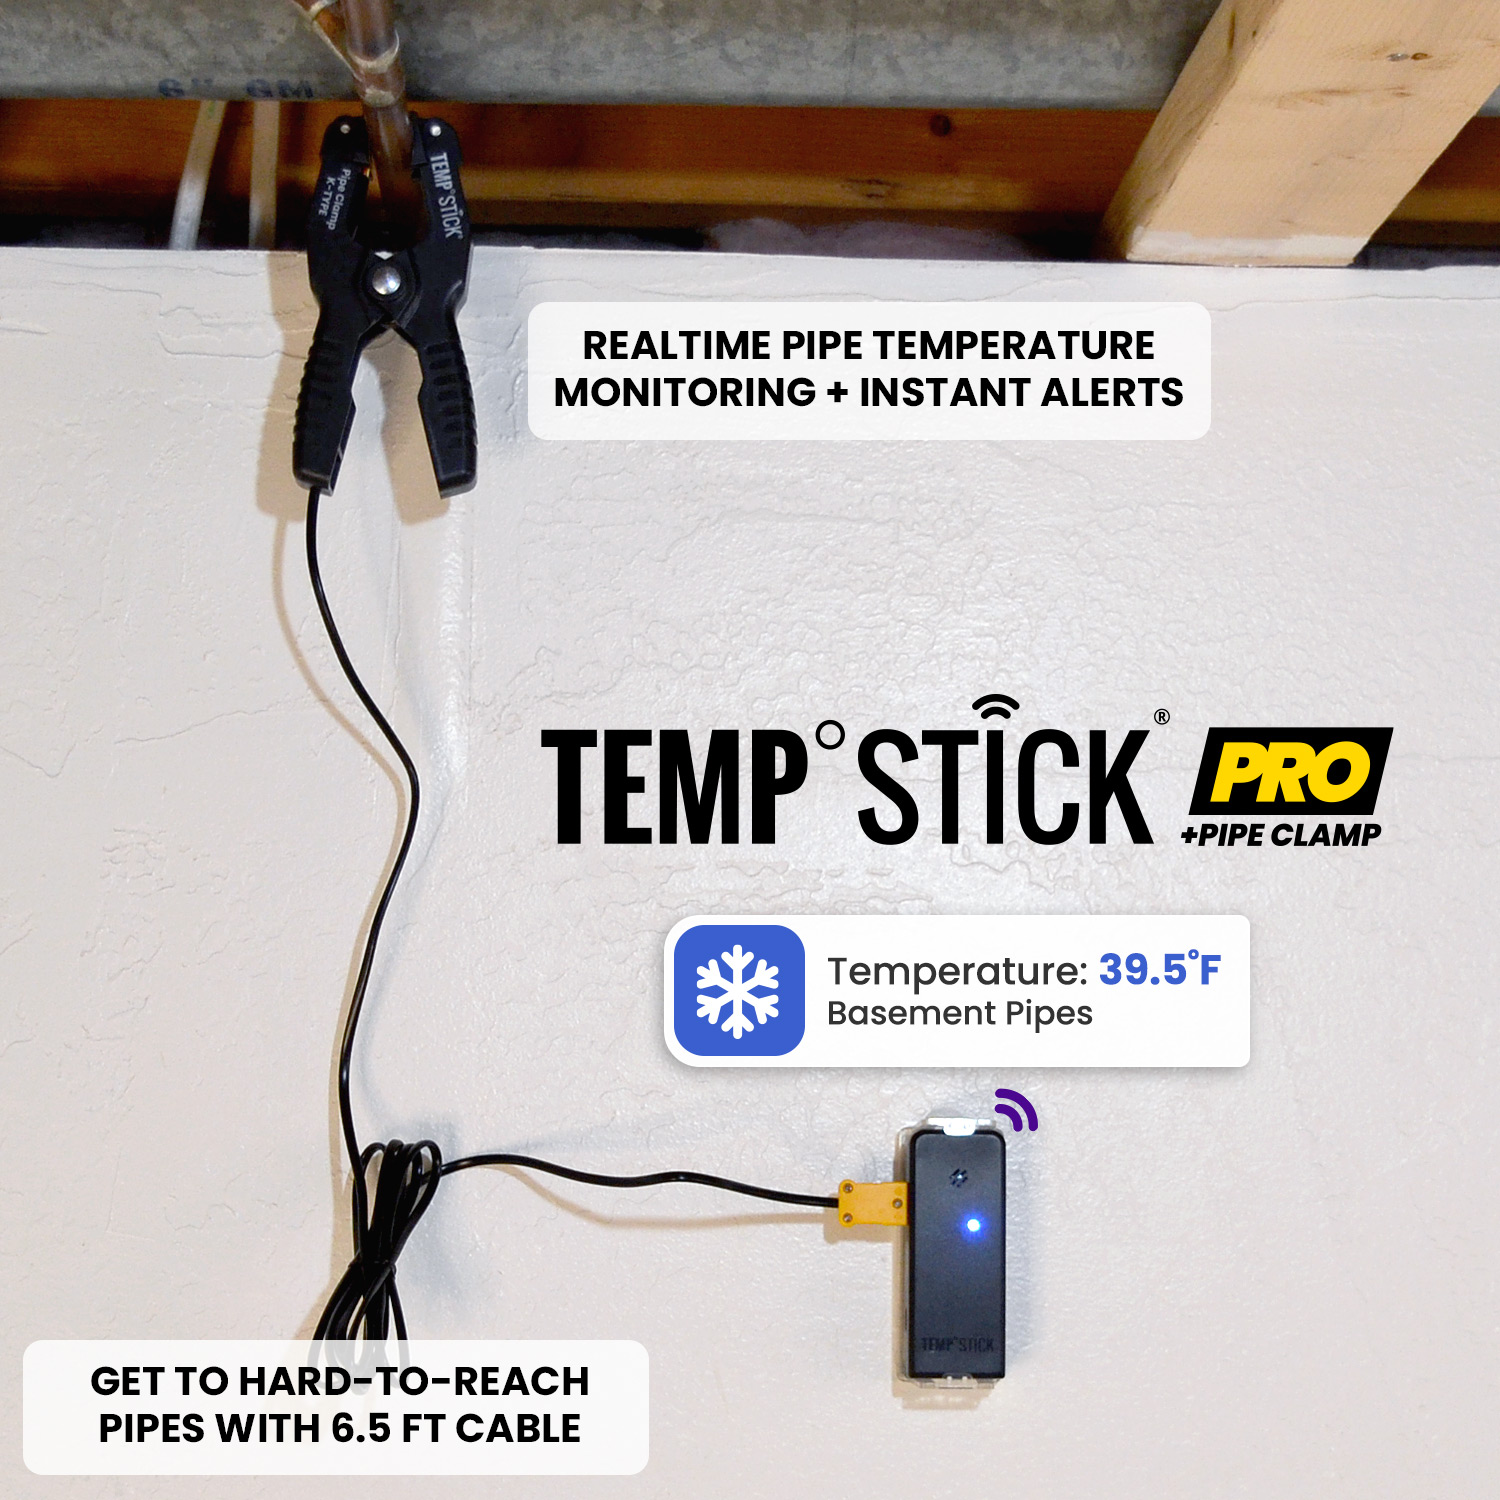 Protection Against Freezing Pipes with Temp Stick PRO